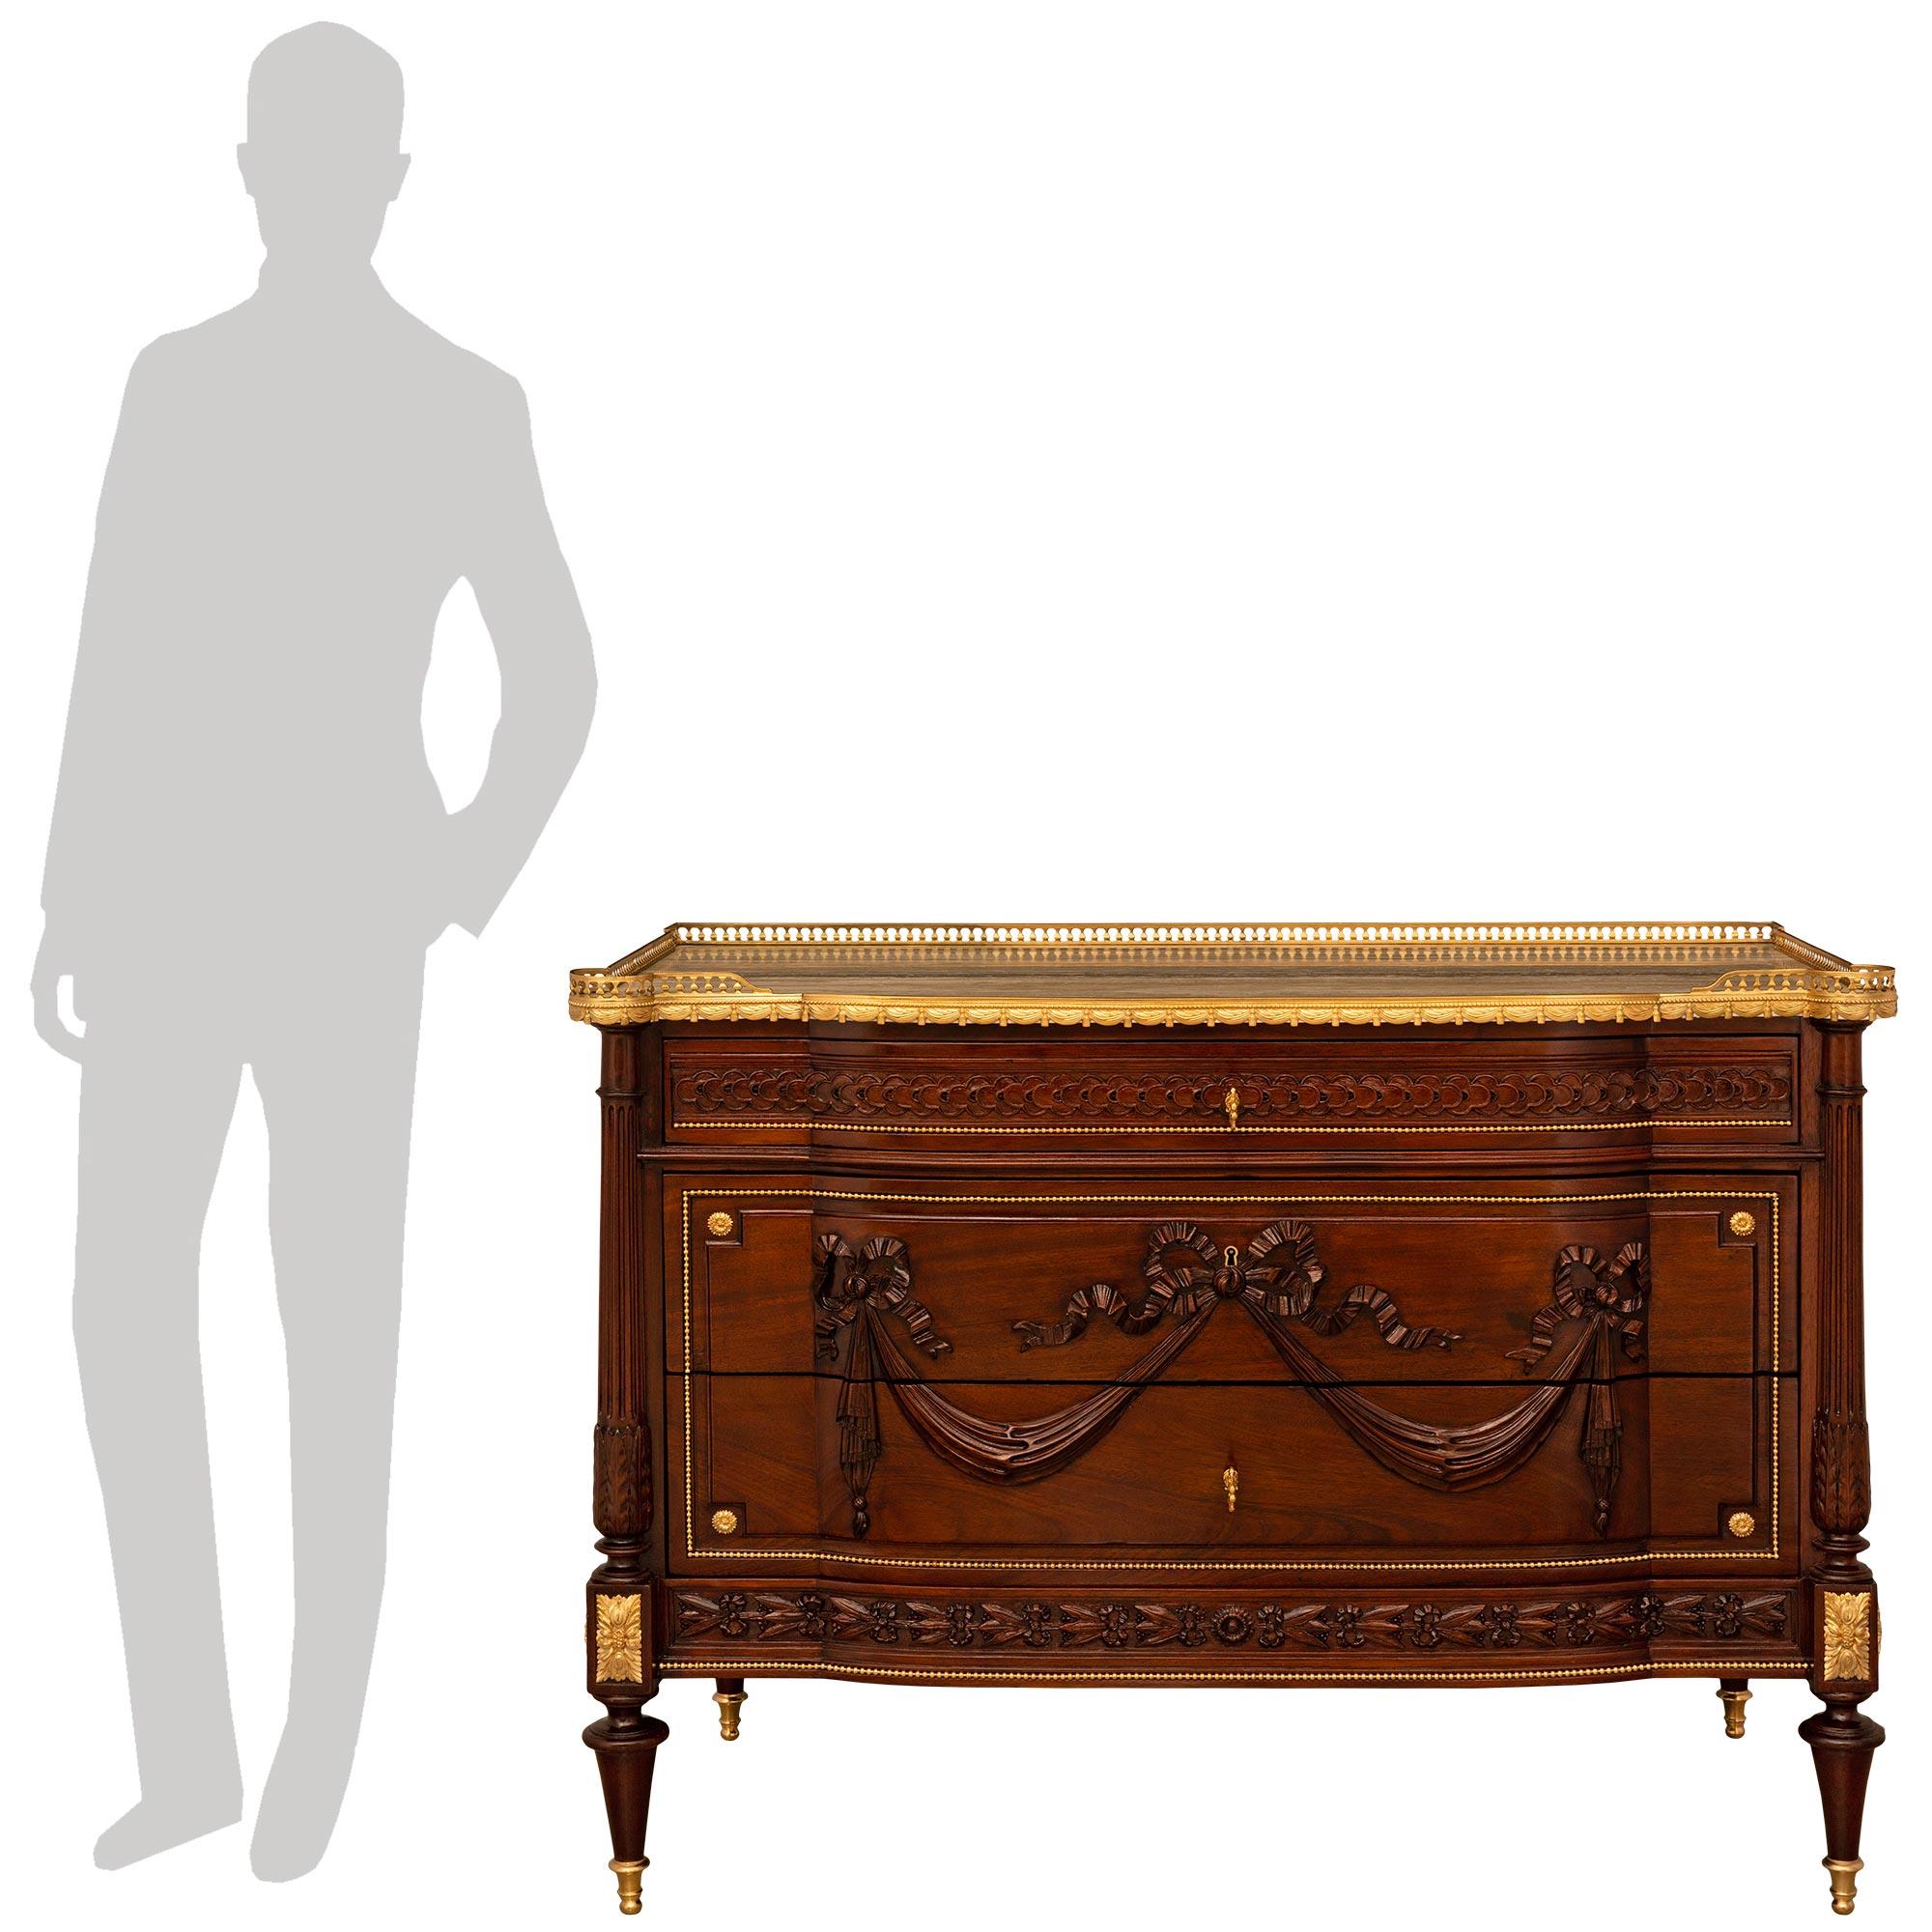 A stunning and high quality French 19th century Louis XVI st. Mahogany, Ormolu, and Stone commode. This highly detailed three drawer commode is raised on four Mahogany legs supported on Ormolu topie shaped sabots. The straight front apron is